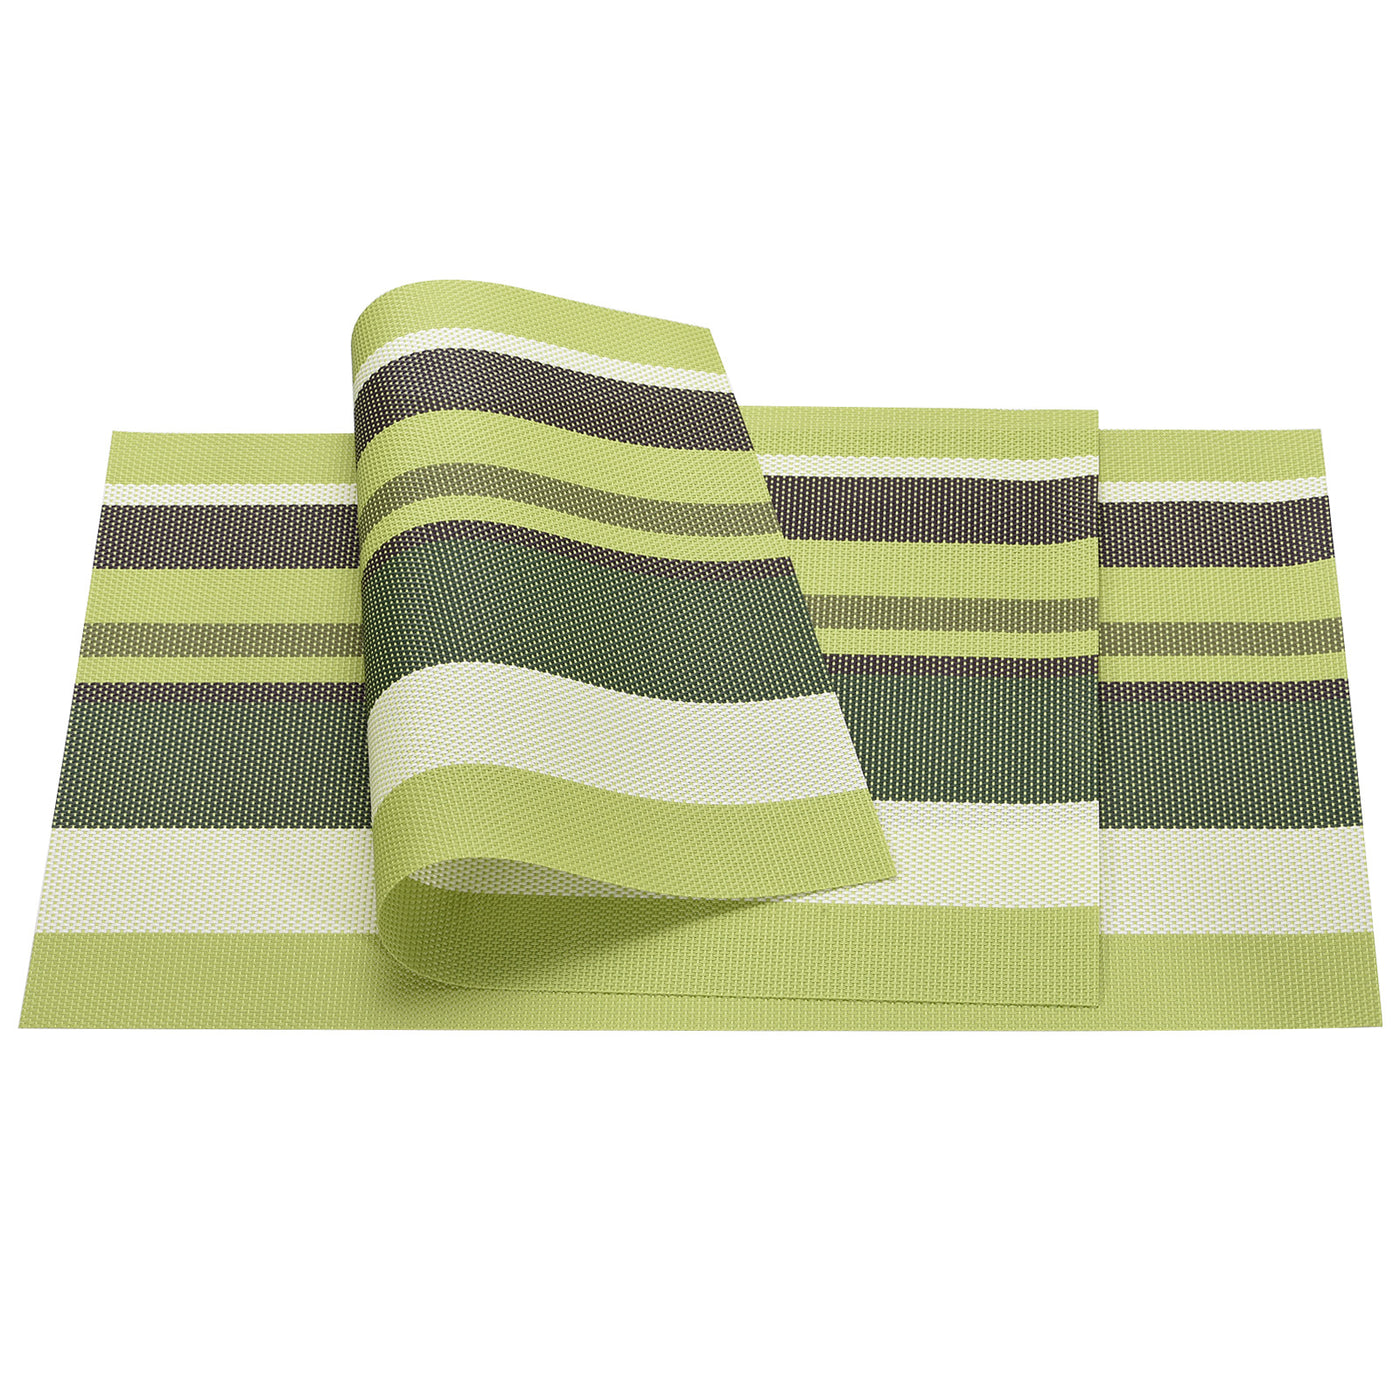 uxcell Uxcell Place Mats 450x300mm 8pcs PVC Table Washable Woven Placemat, Stripe Green